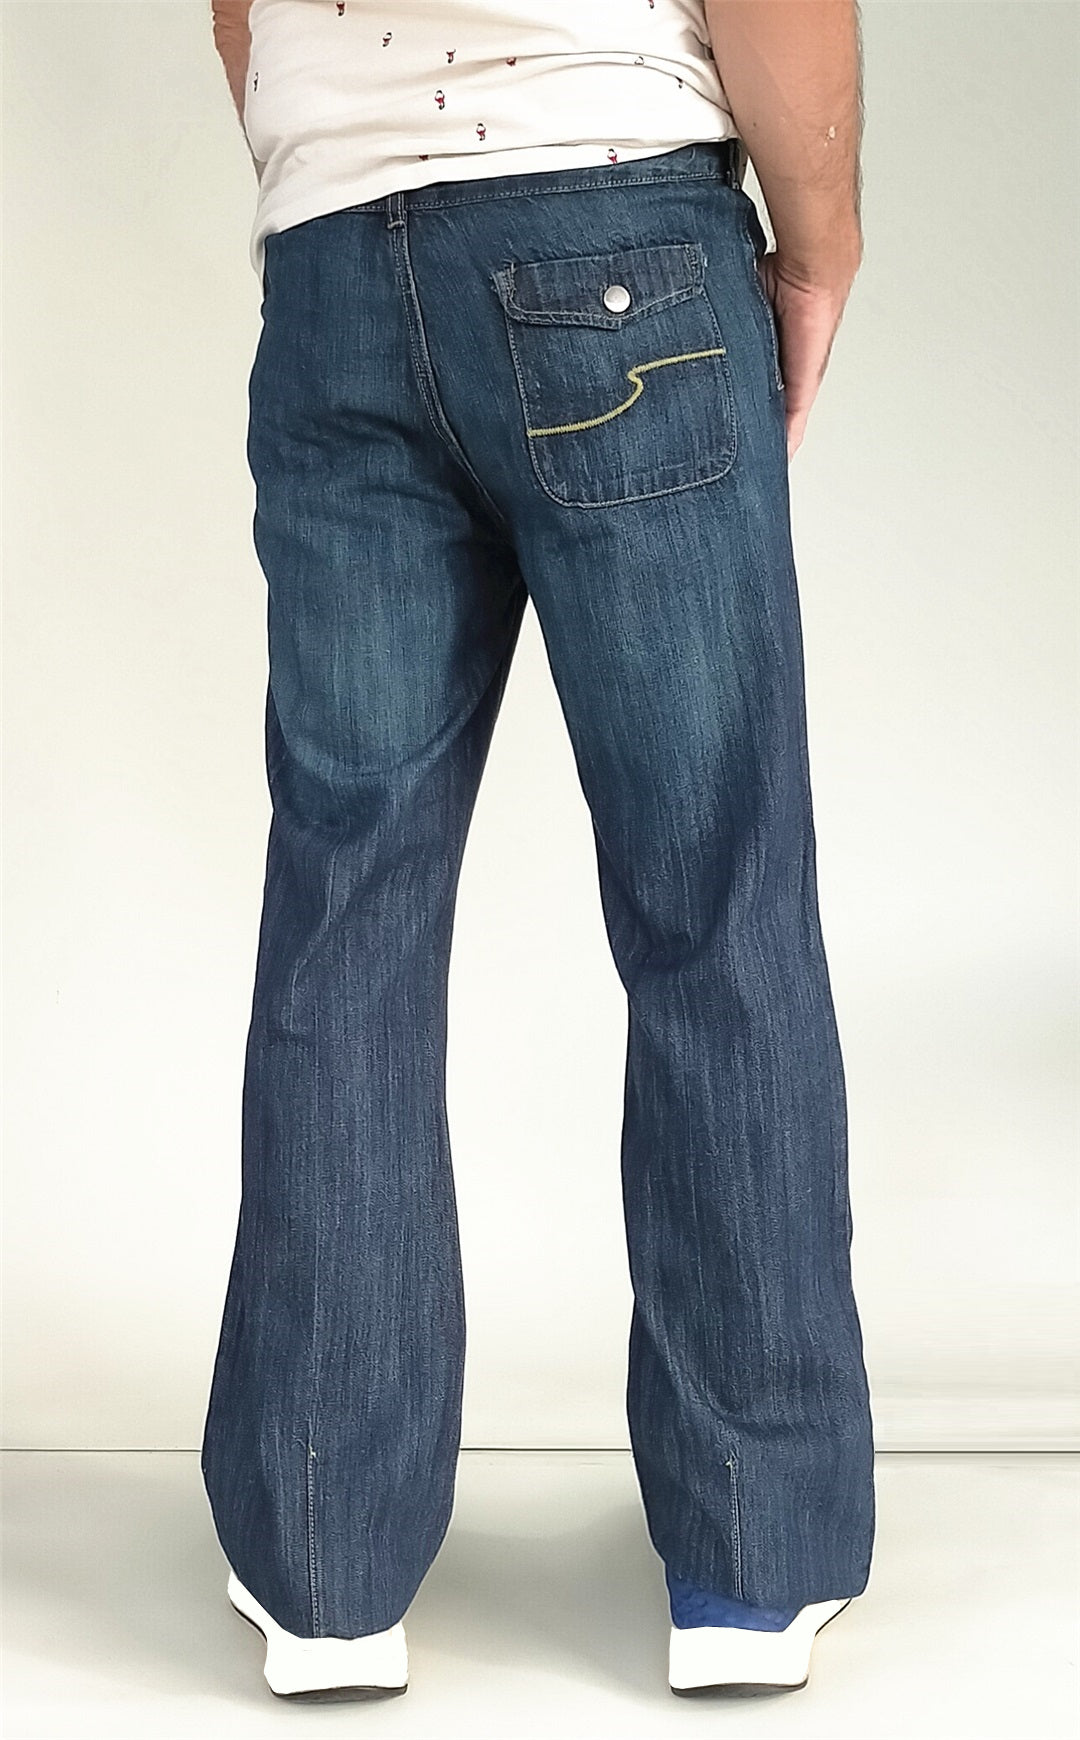 Men JEANIUS JEANS William relaxed Bootcut Jeans in blue - Mid rise